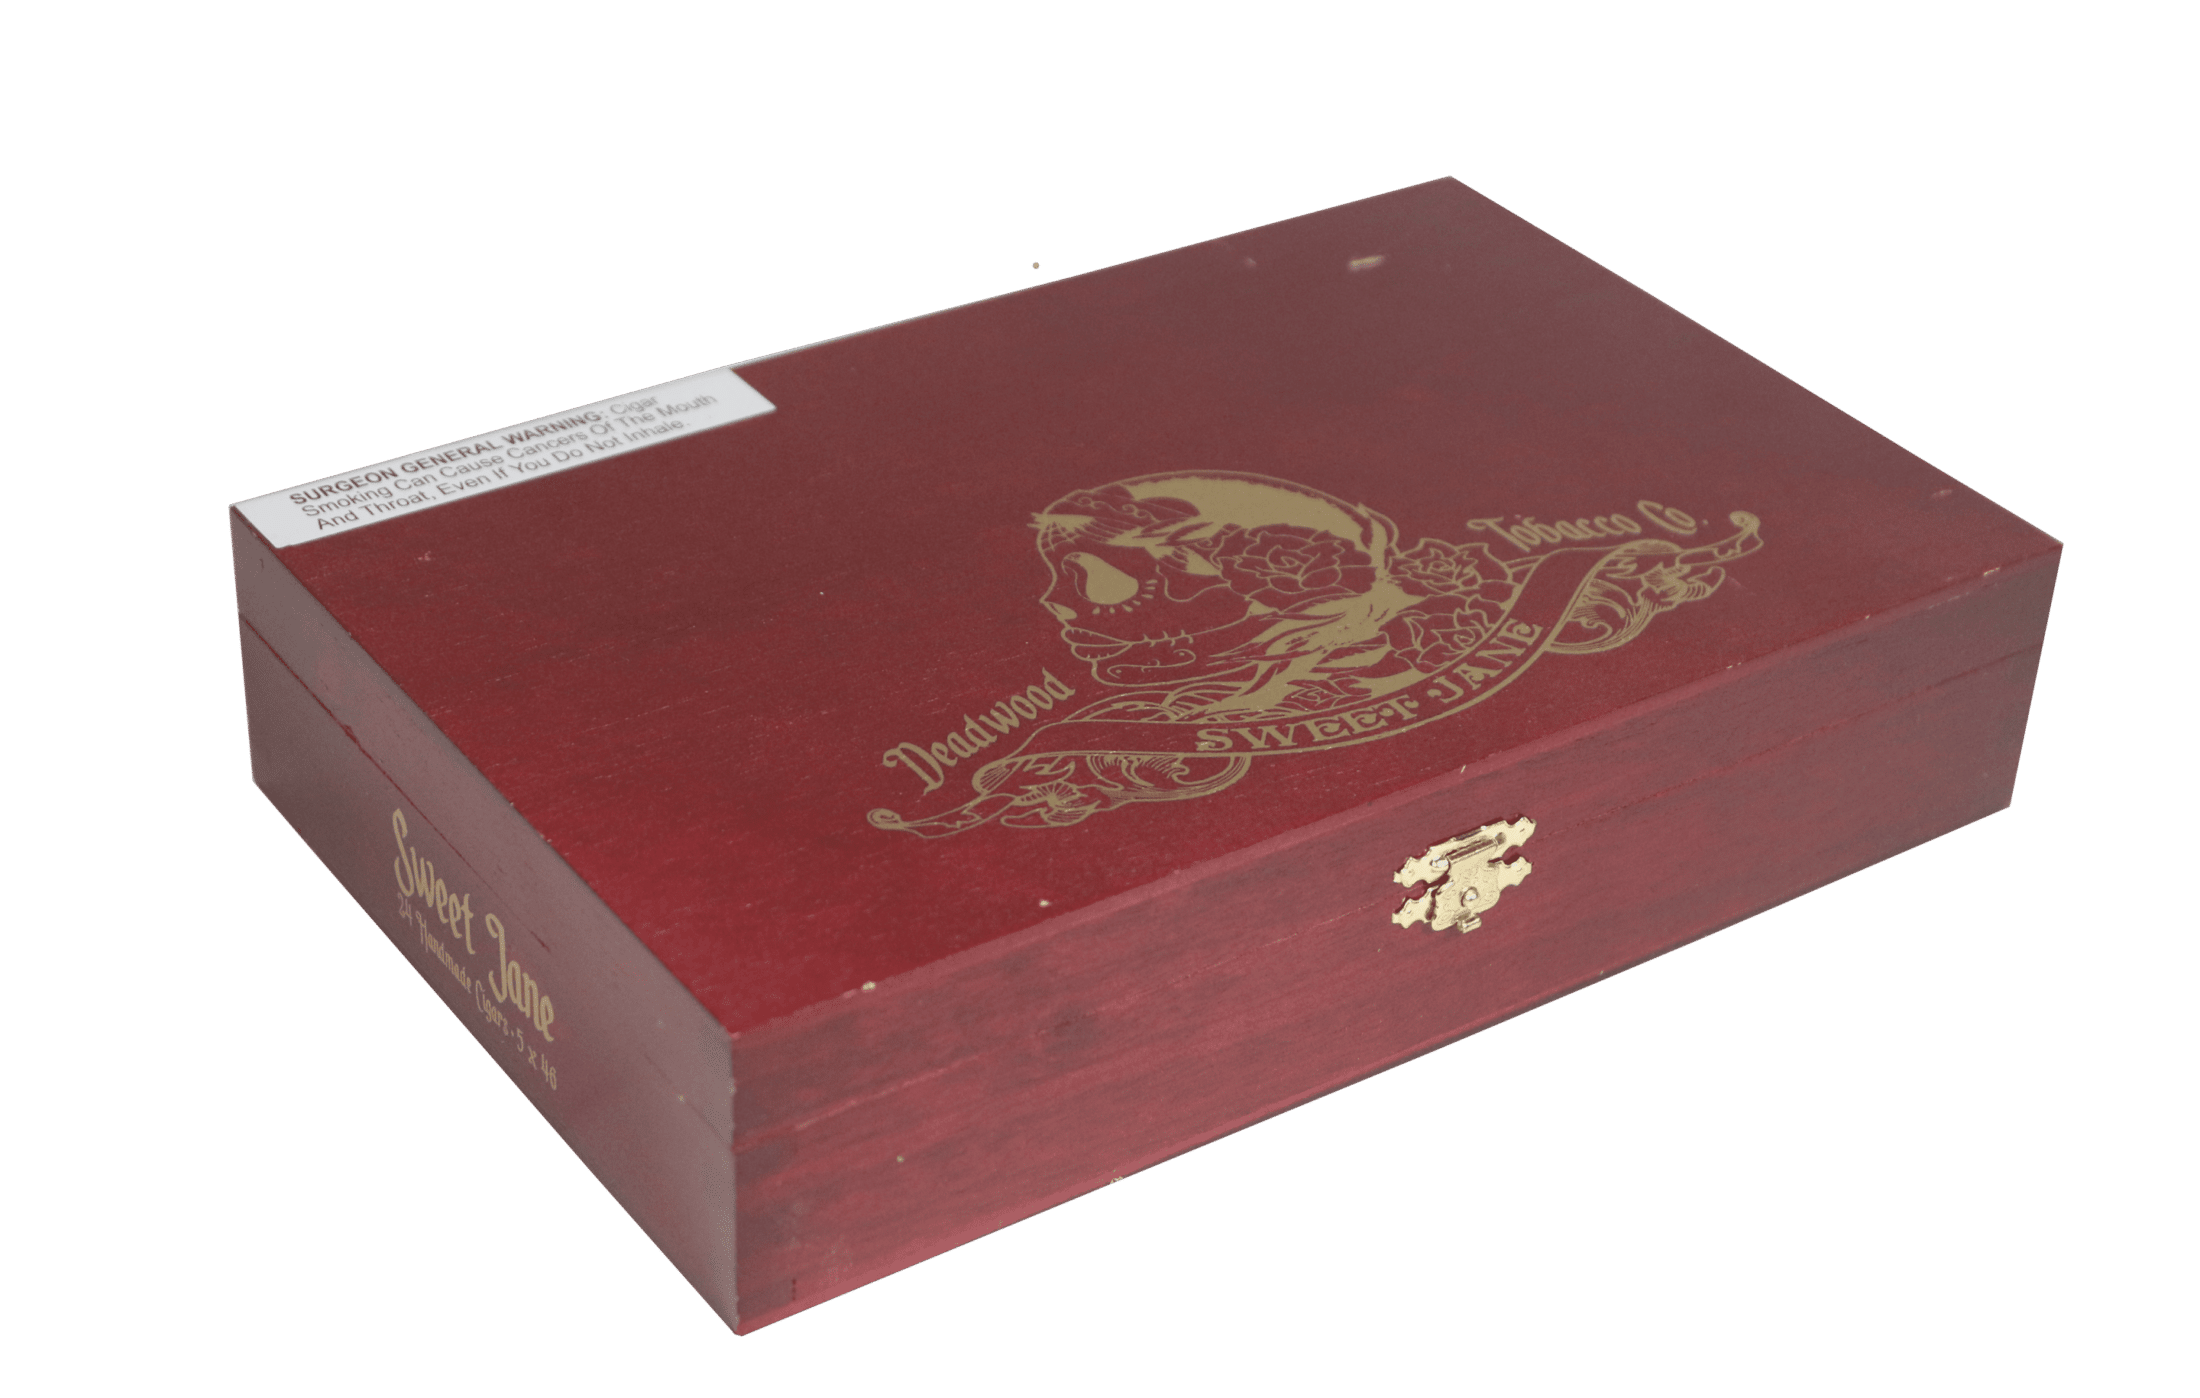 Closed box of 24 count Deadwood Sweet Jane cigars